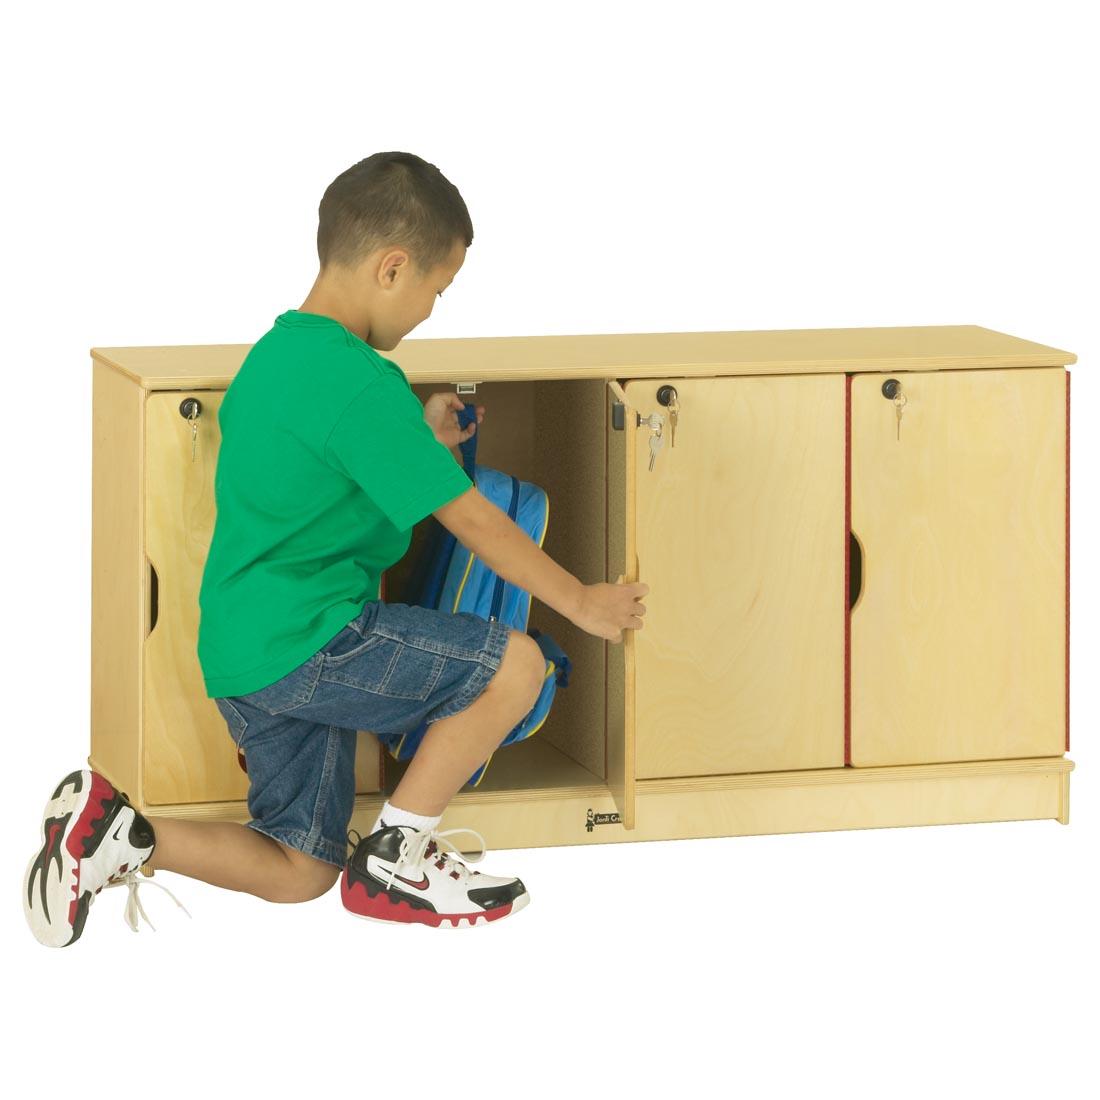 child putting backpack into the Single Stacking Locker